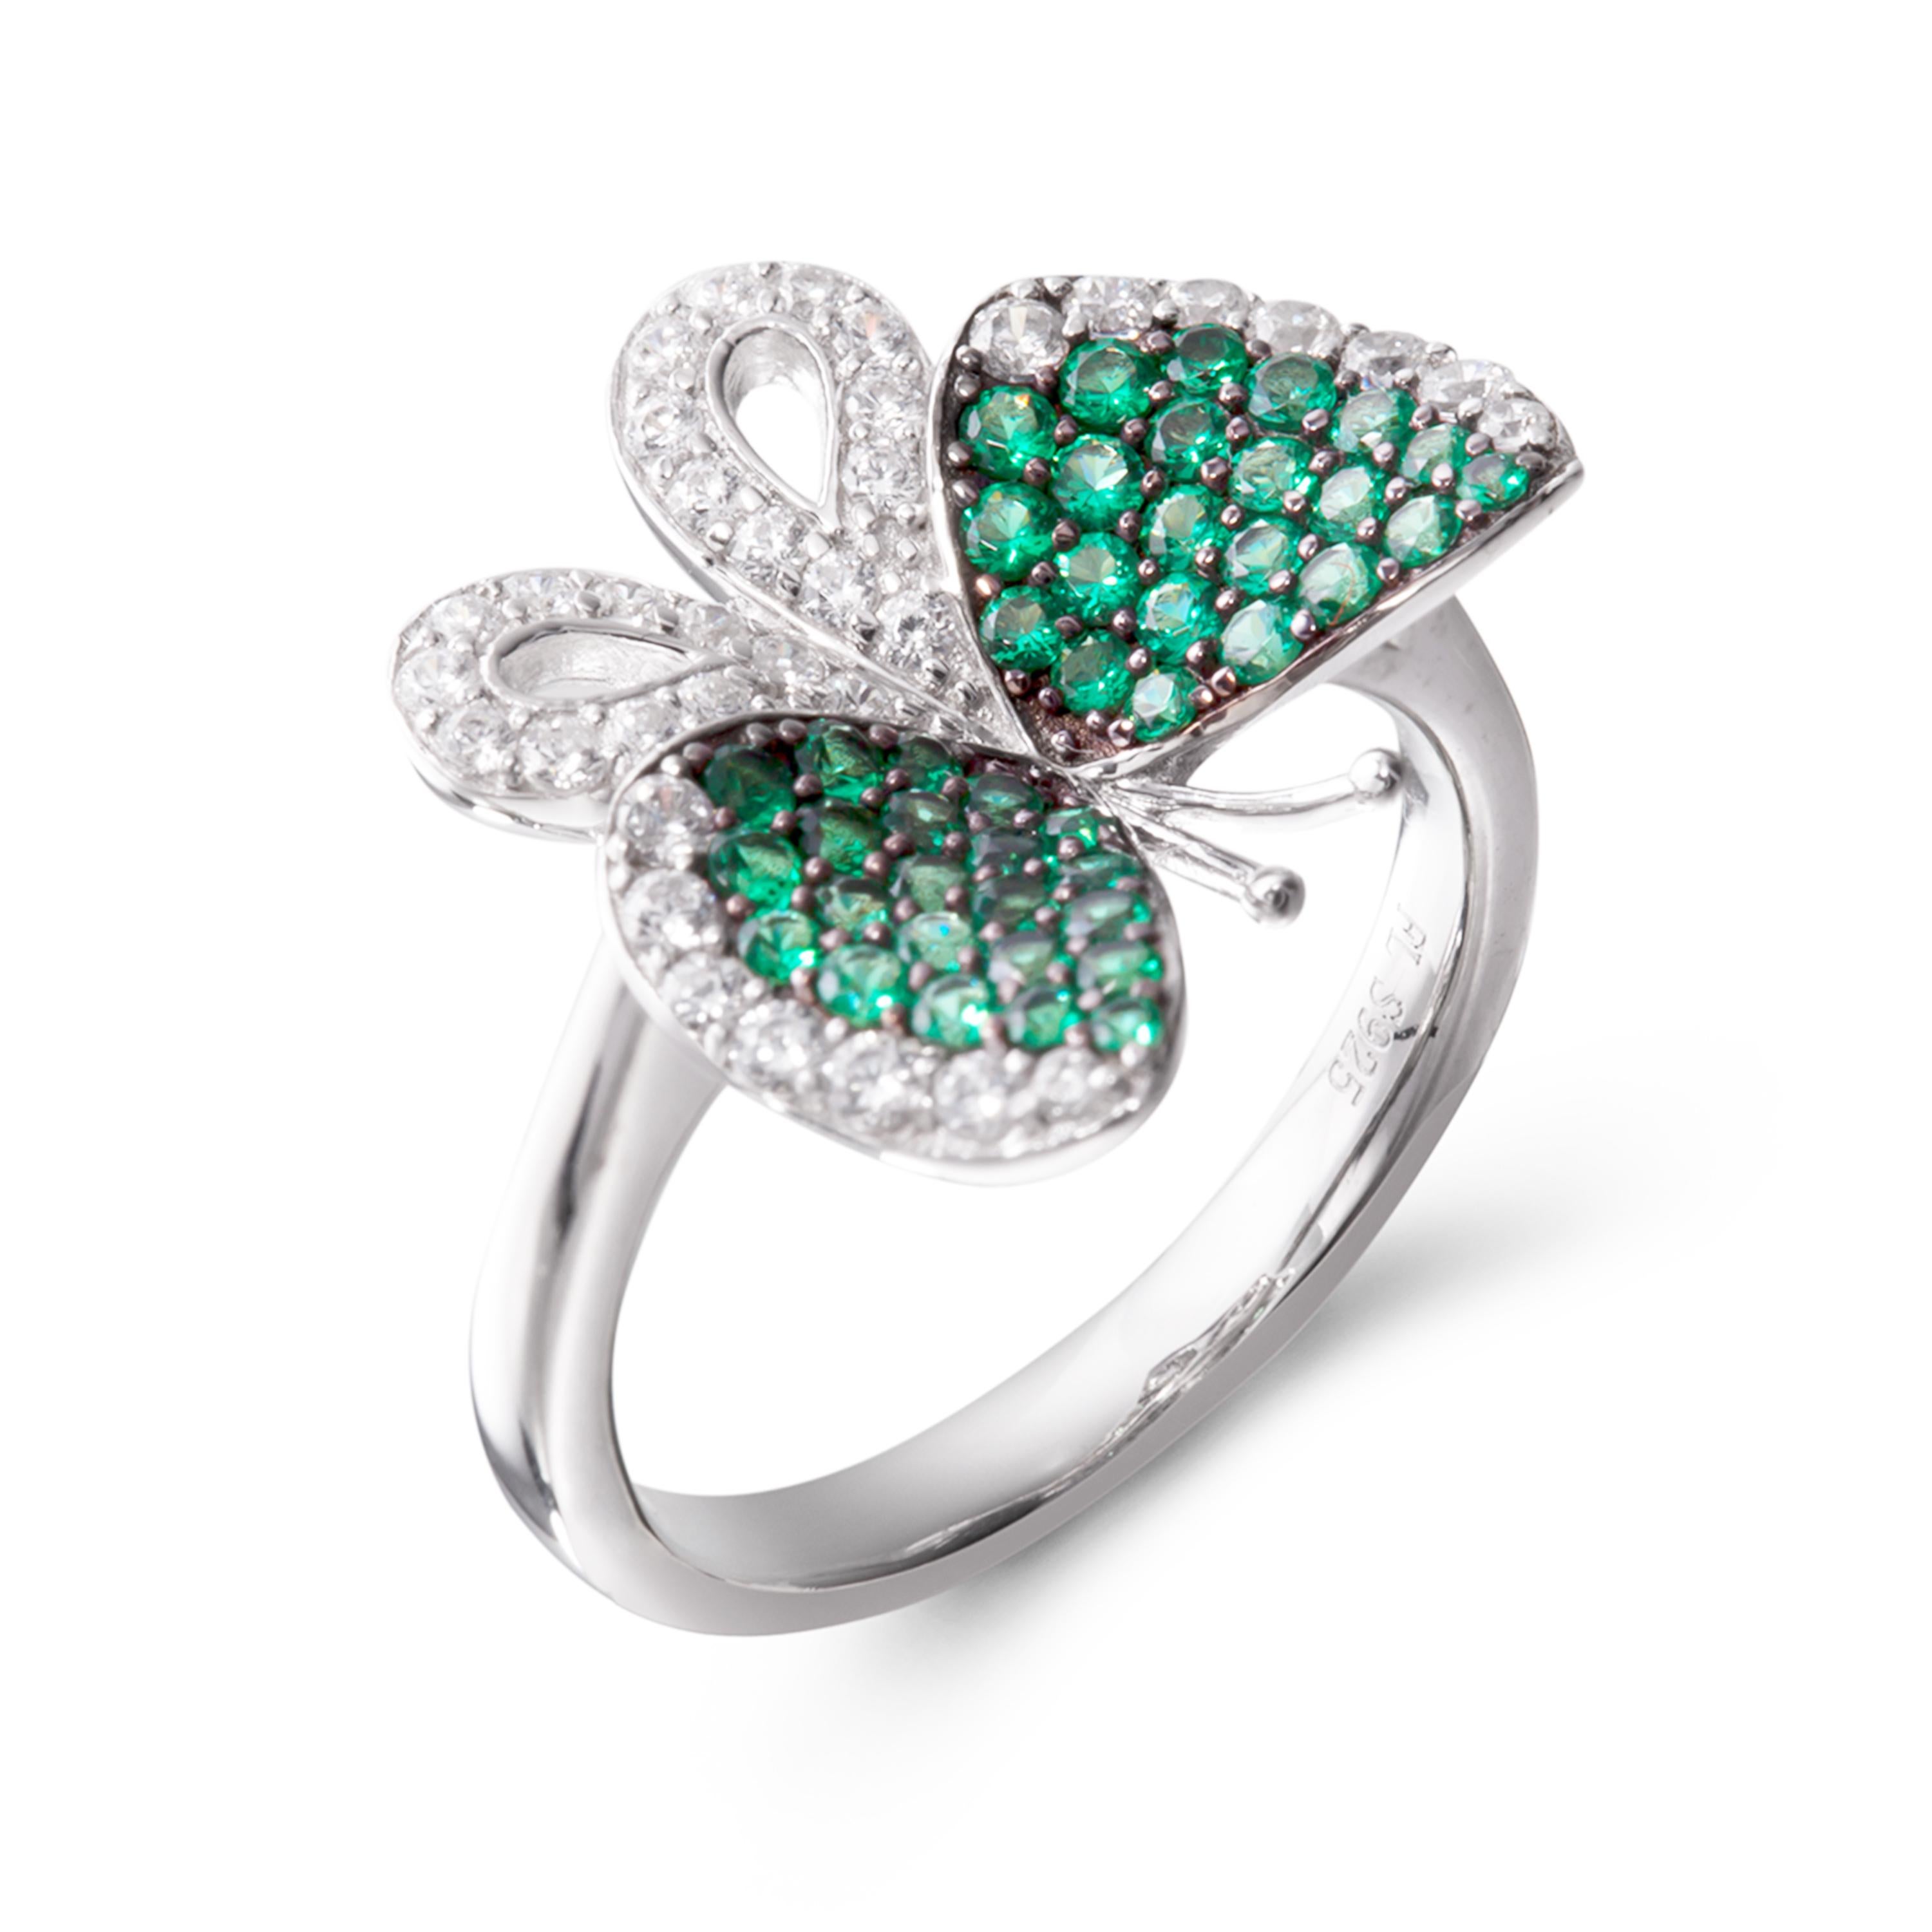 Butterfly captures the feminine essence and the carefree, joyful movement of these intricate and delicate creatures in sparkling weightless jewels. Butterfly ring with wings bejewelled in emerald green and white cubic zirconia set in white rhodium